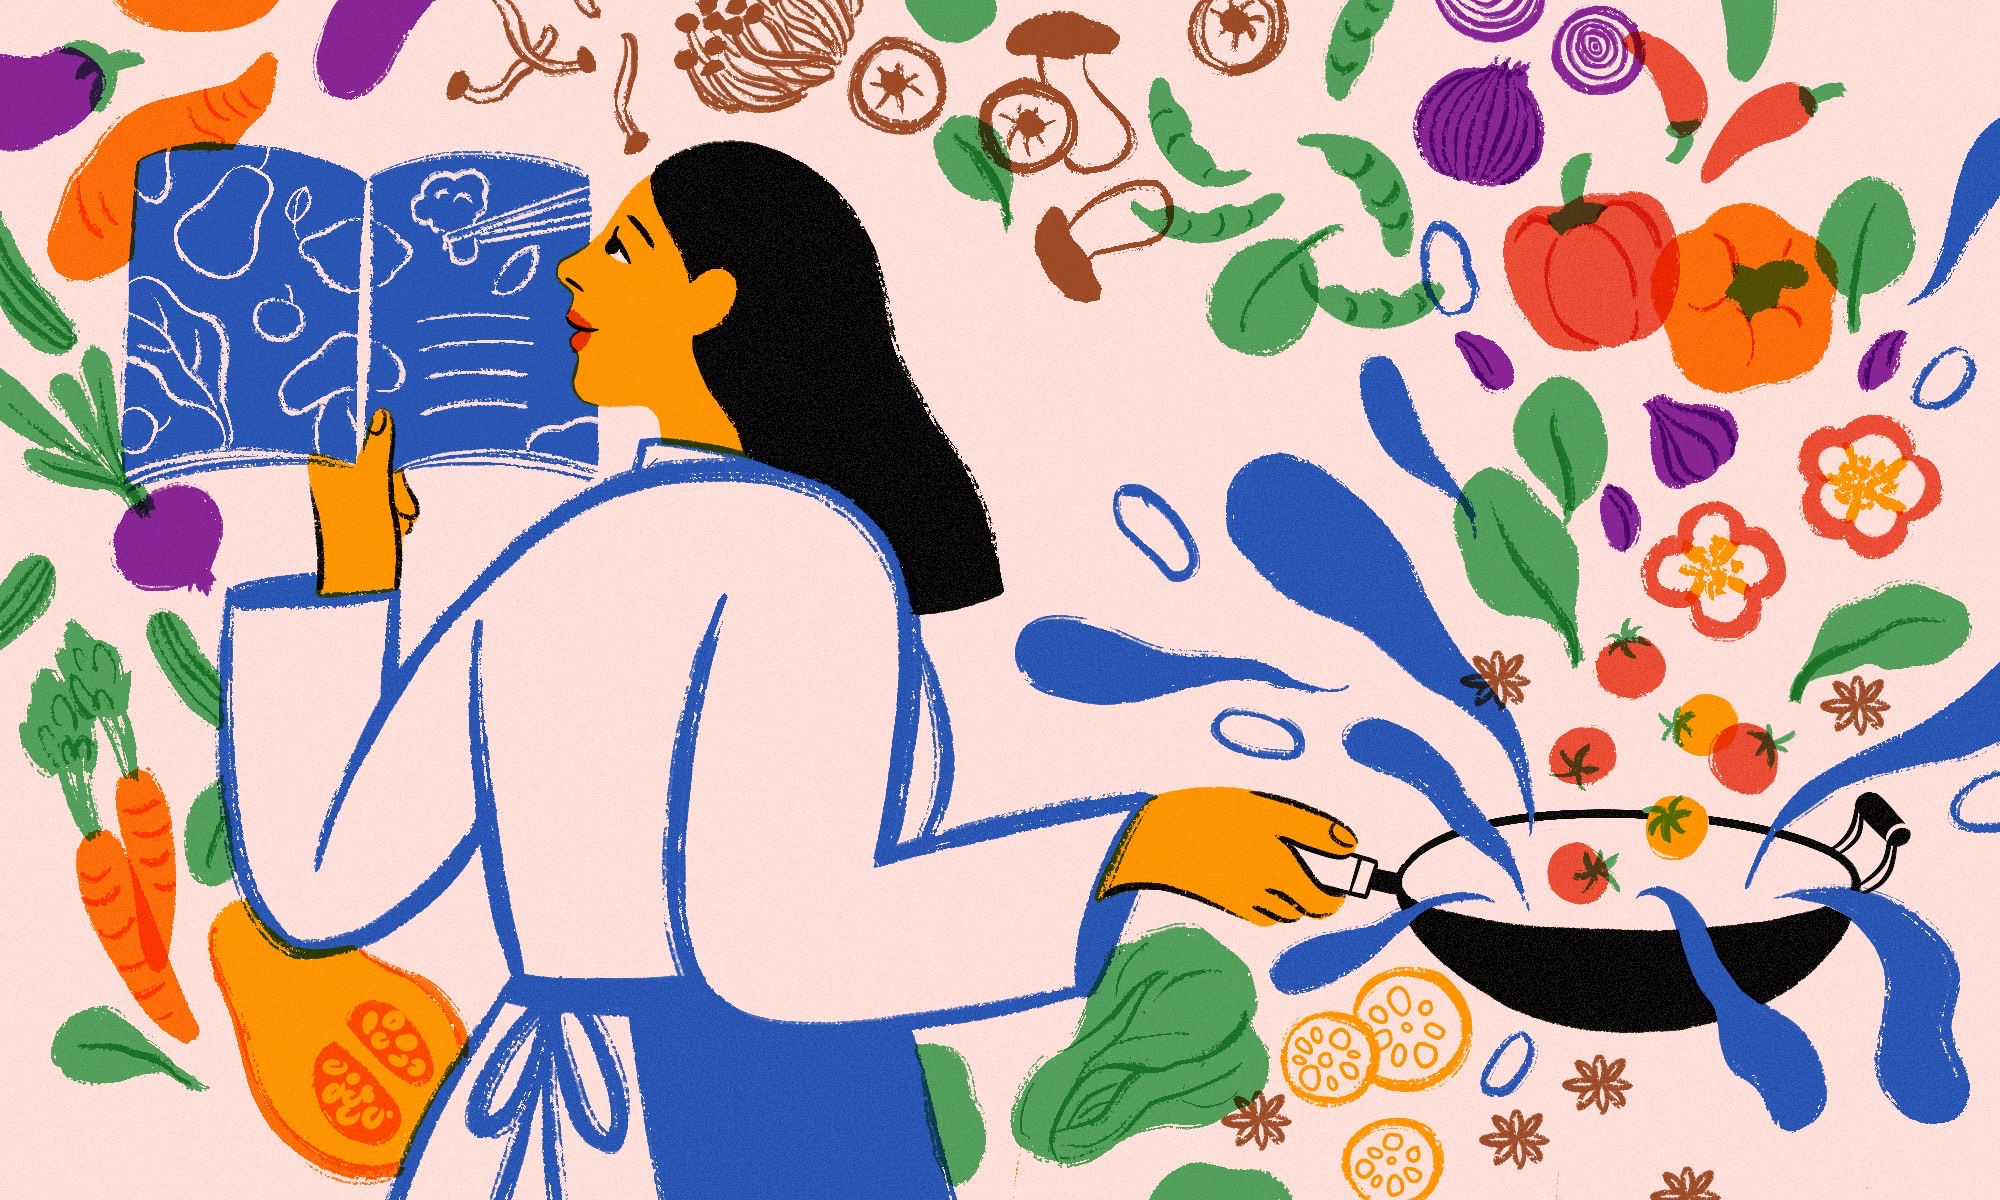 An illustration of a woman cooking vegetables in a wok while holding a cookbook